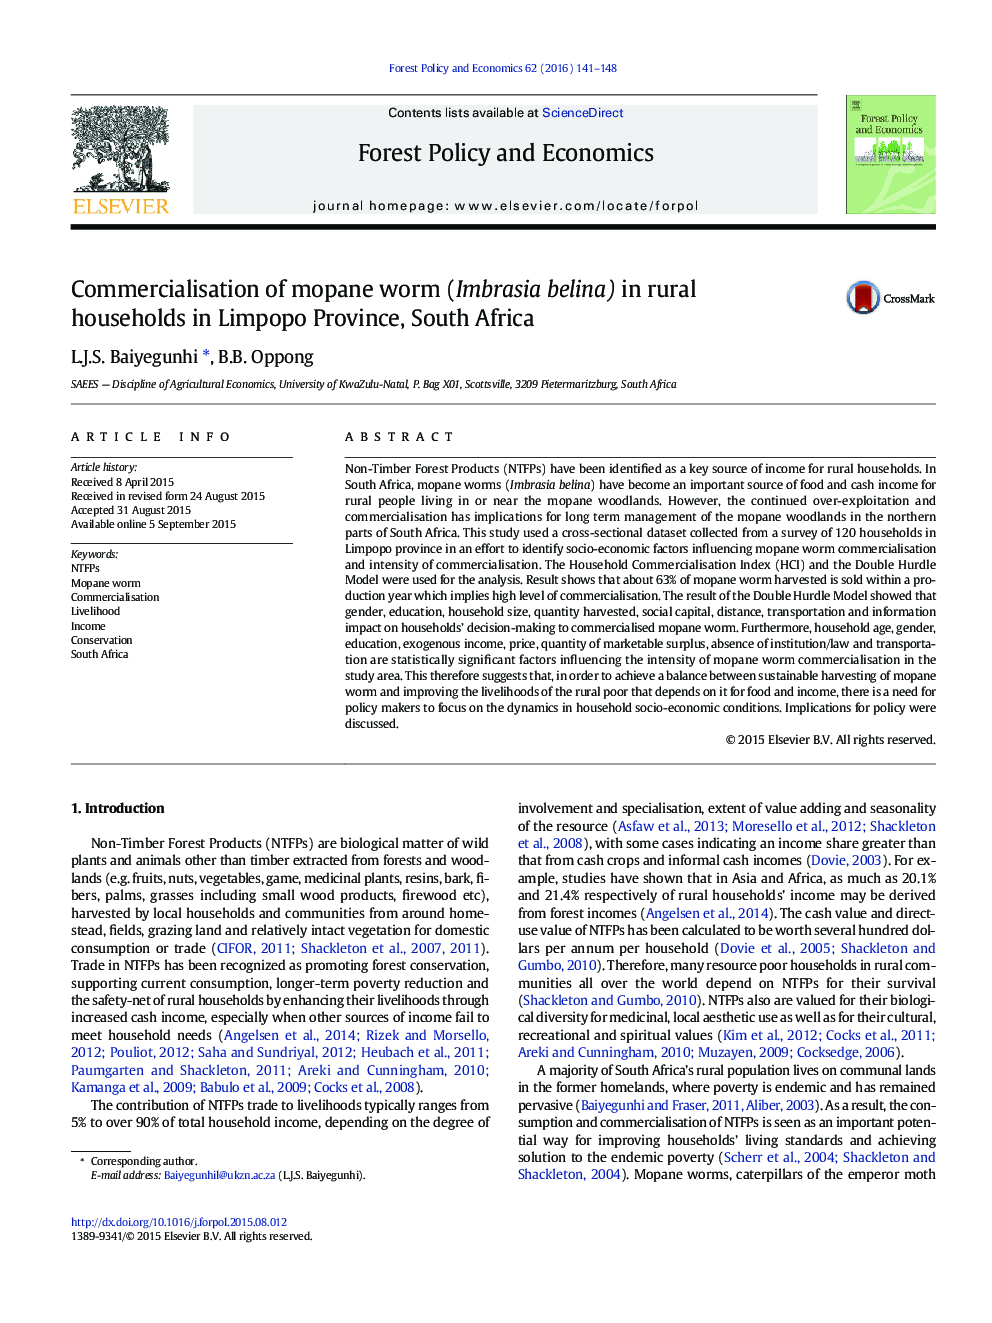 Commercialisation of mopane worm (Imbrasia belina) in rural households in Limpopo Province, South Africa